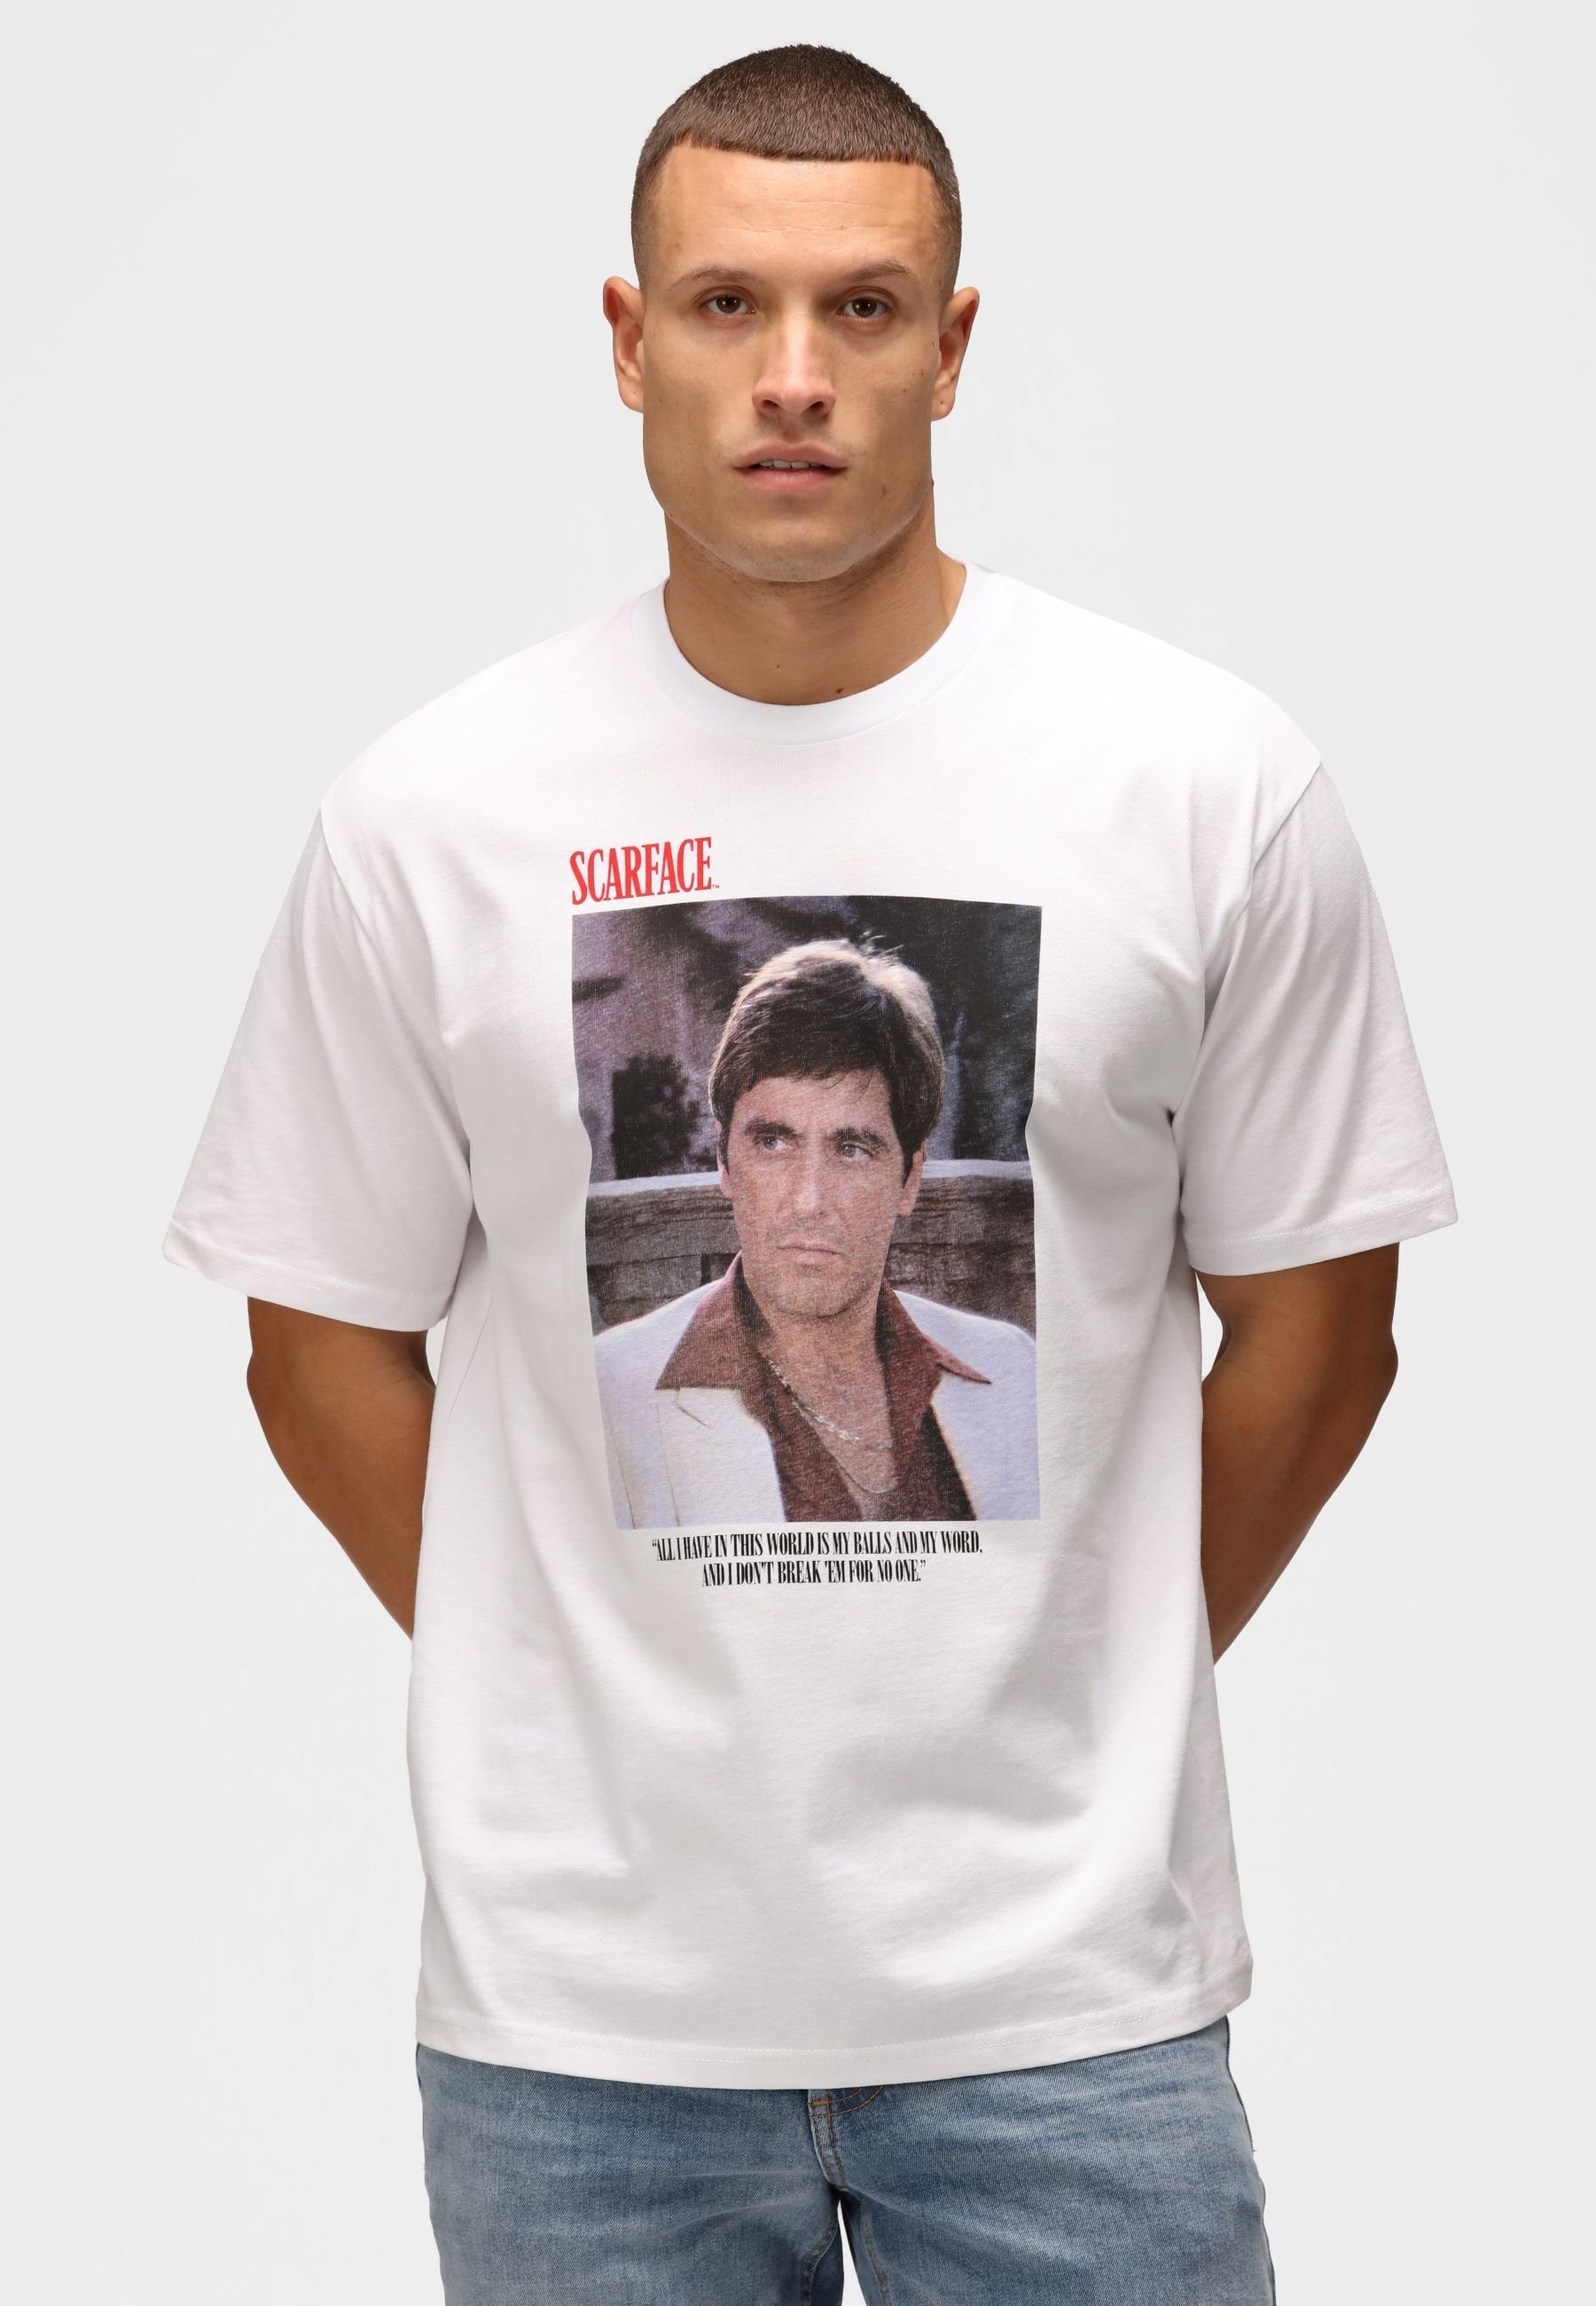 Recovered T-Shirt Scarface 'All I have in this world' GOTS zertifizierte Bio-Baumwolle